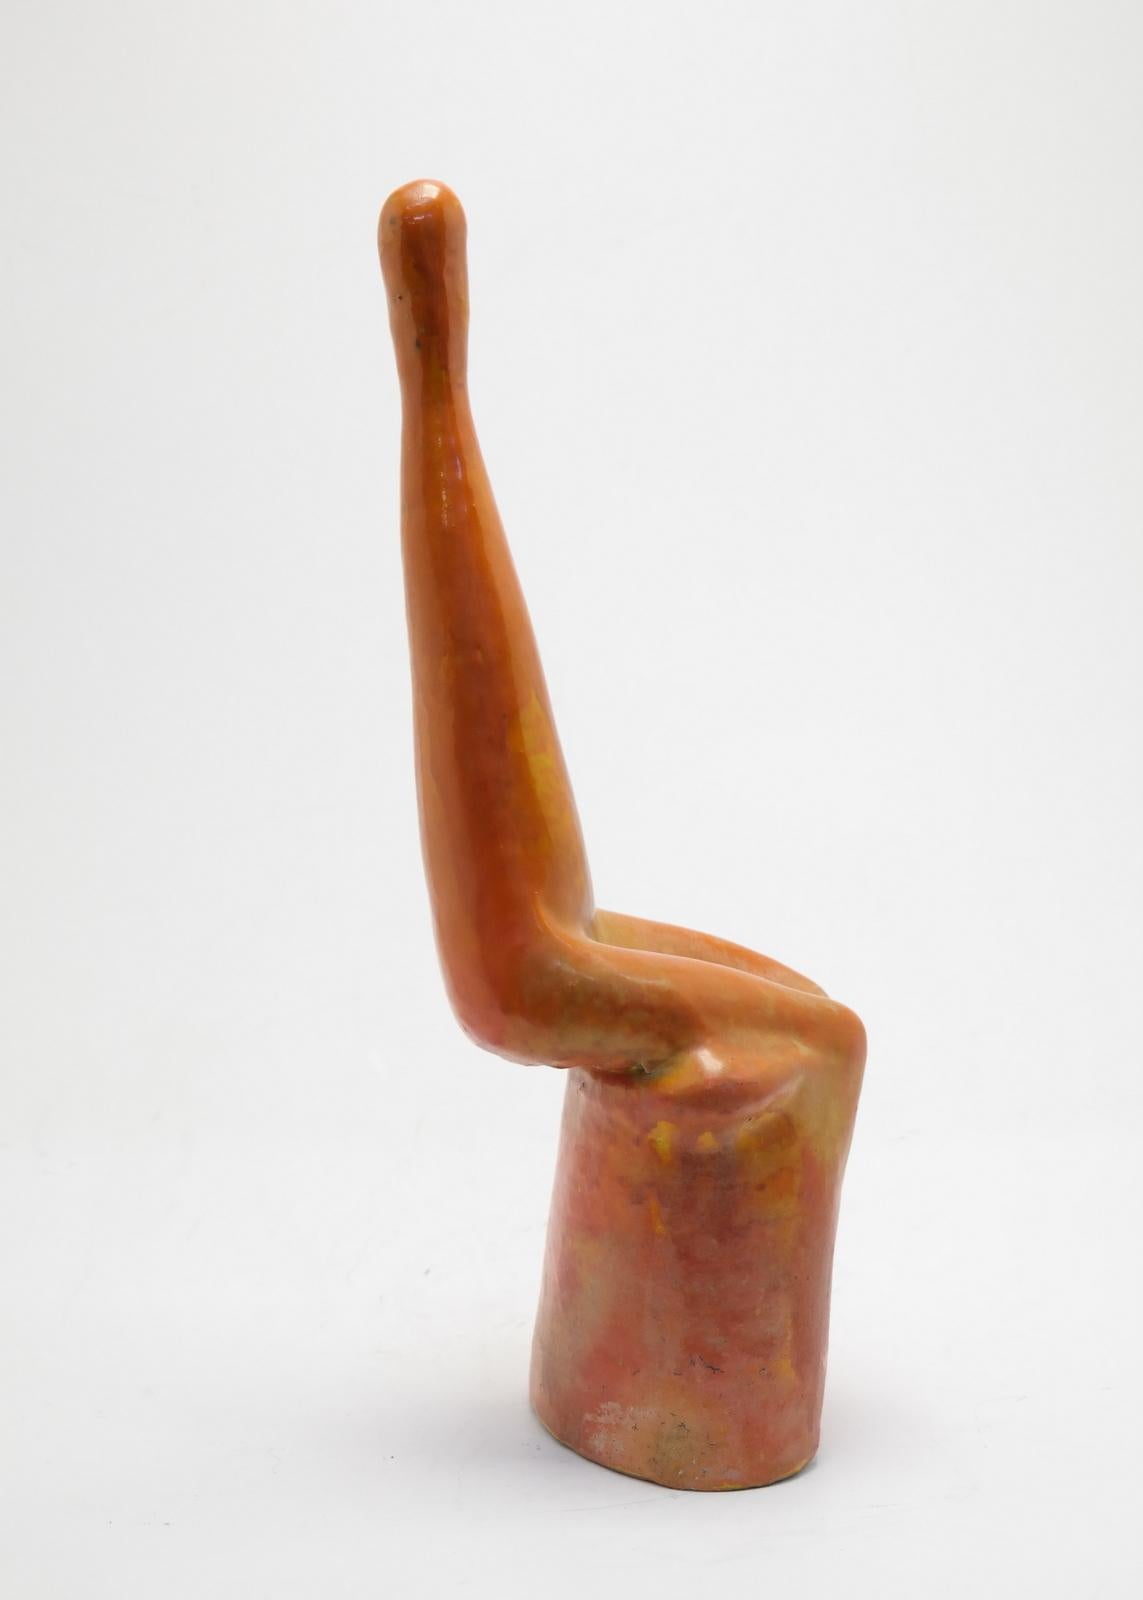 Abstract Sitting Nude Ceramic Sculpture, Unknown, 1960s 1